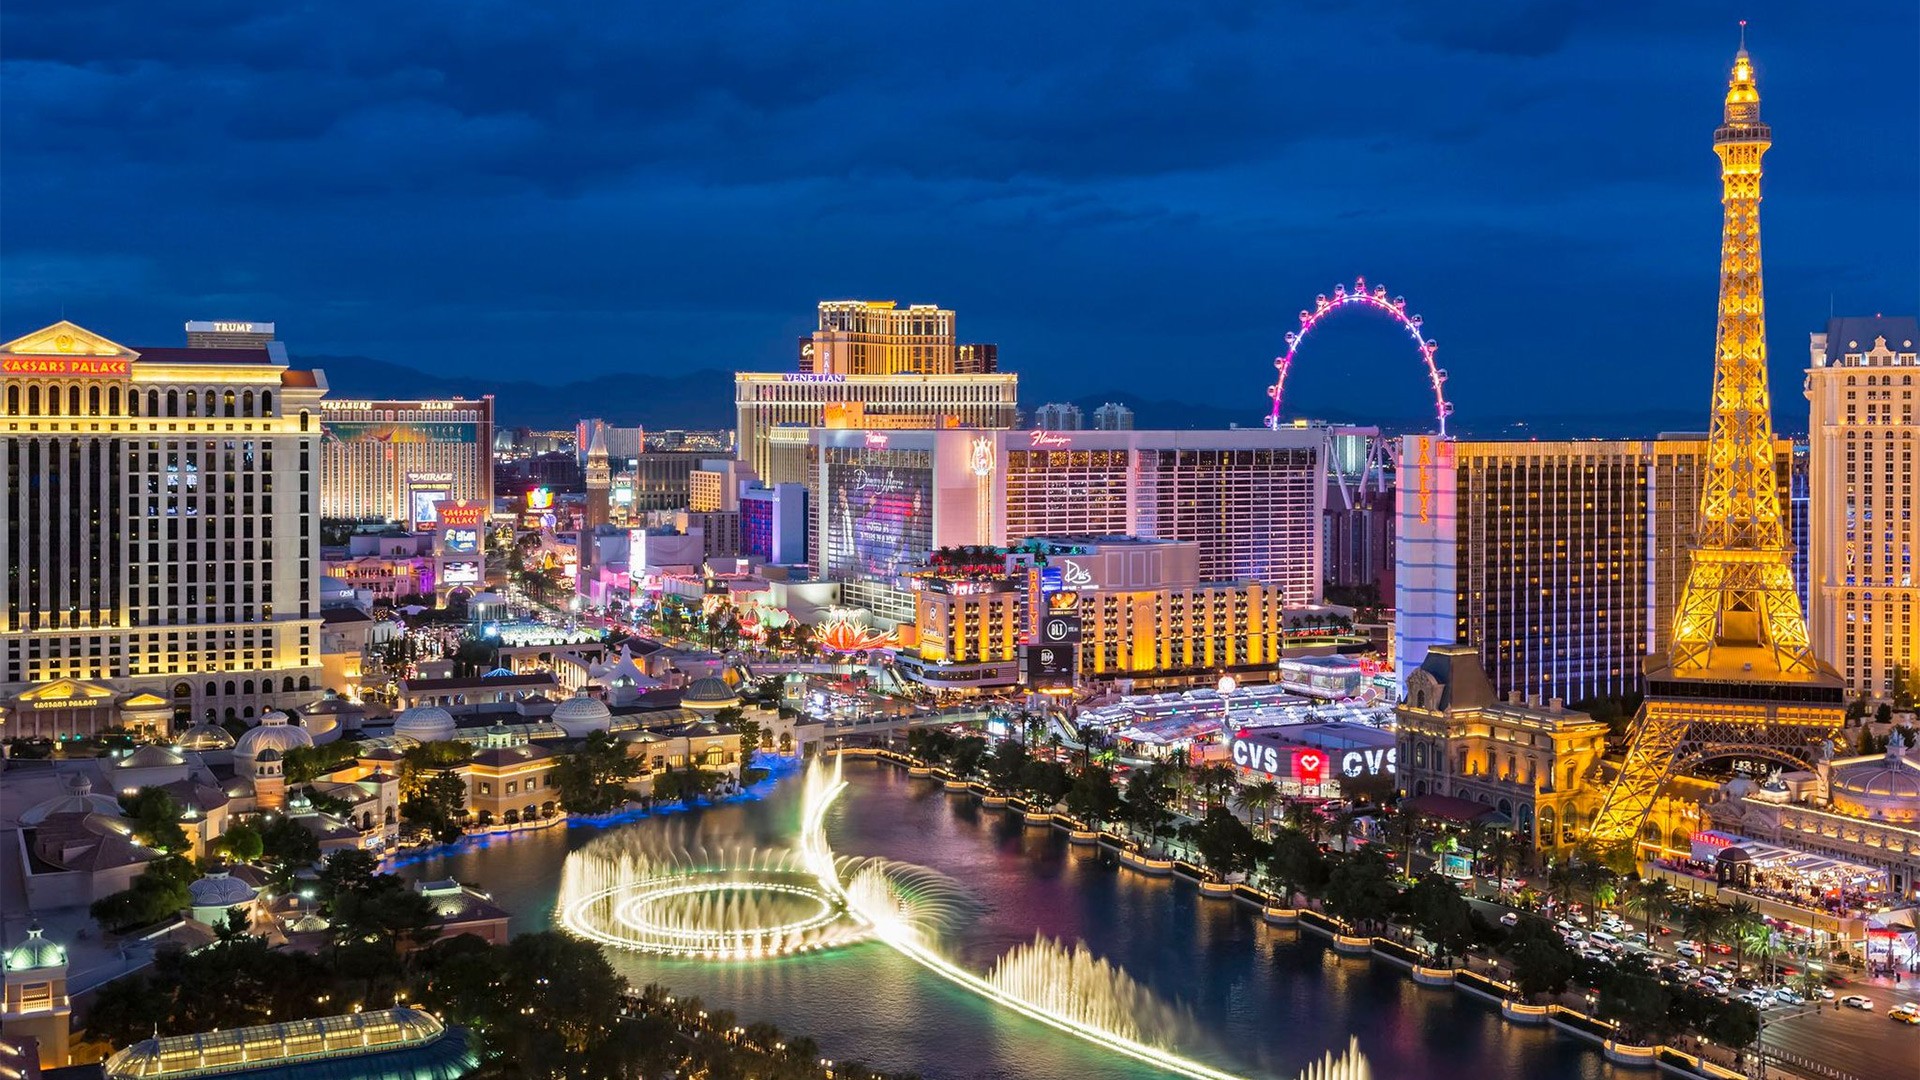 Nevada: Several major real estate deals including Strip casinos reportedly resulted in lost transfer taxes due to 2007 law change